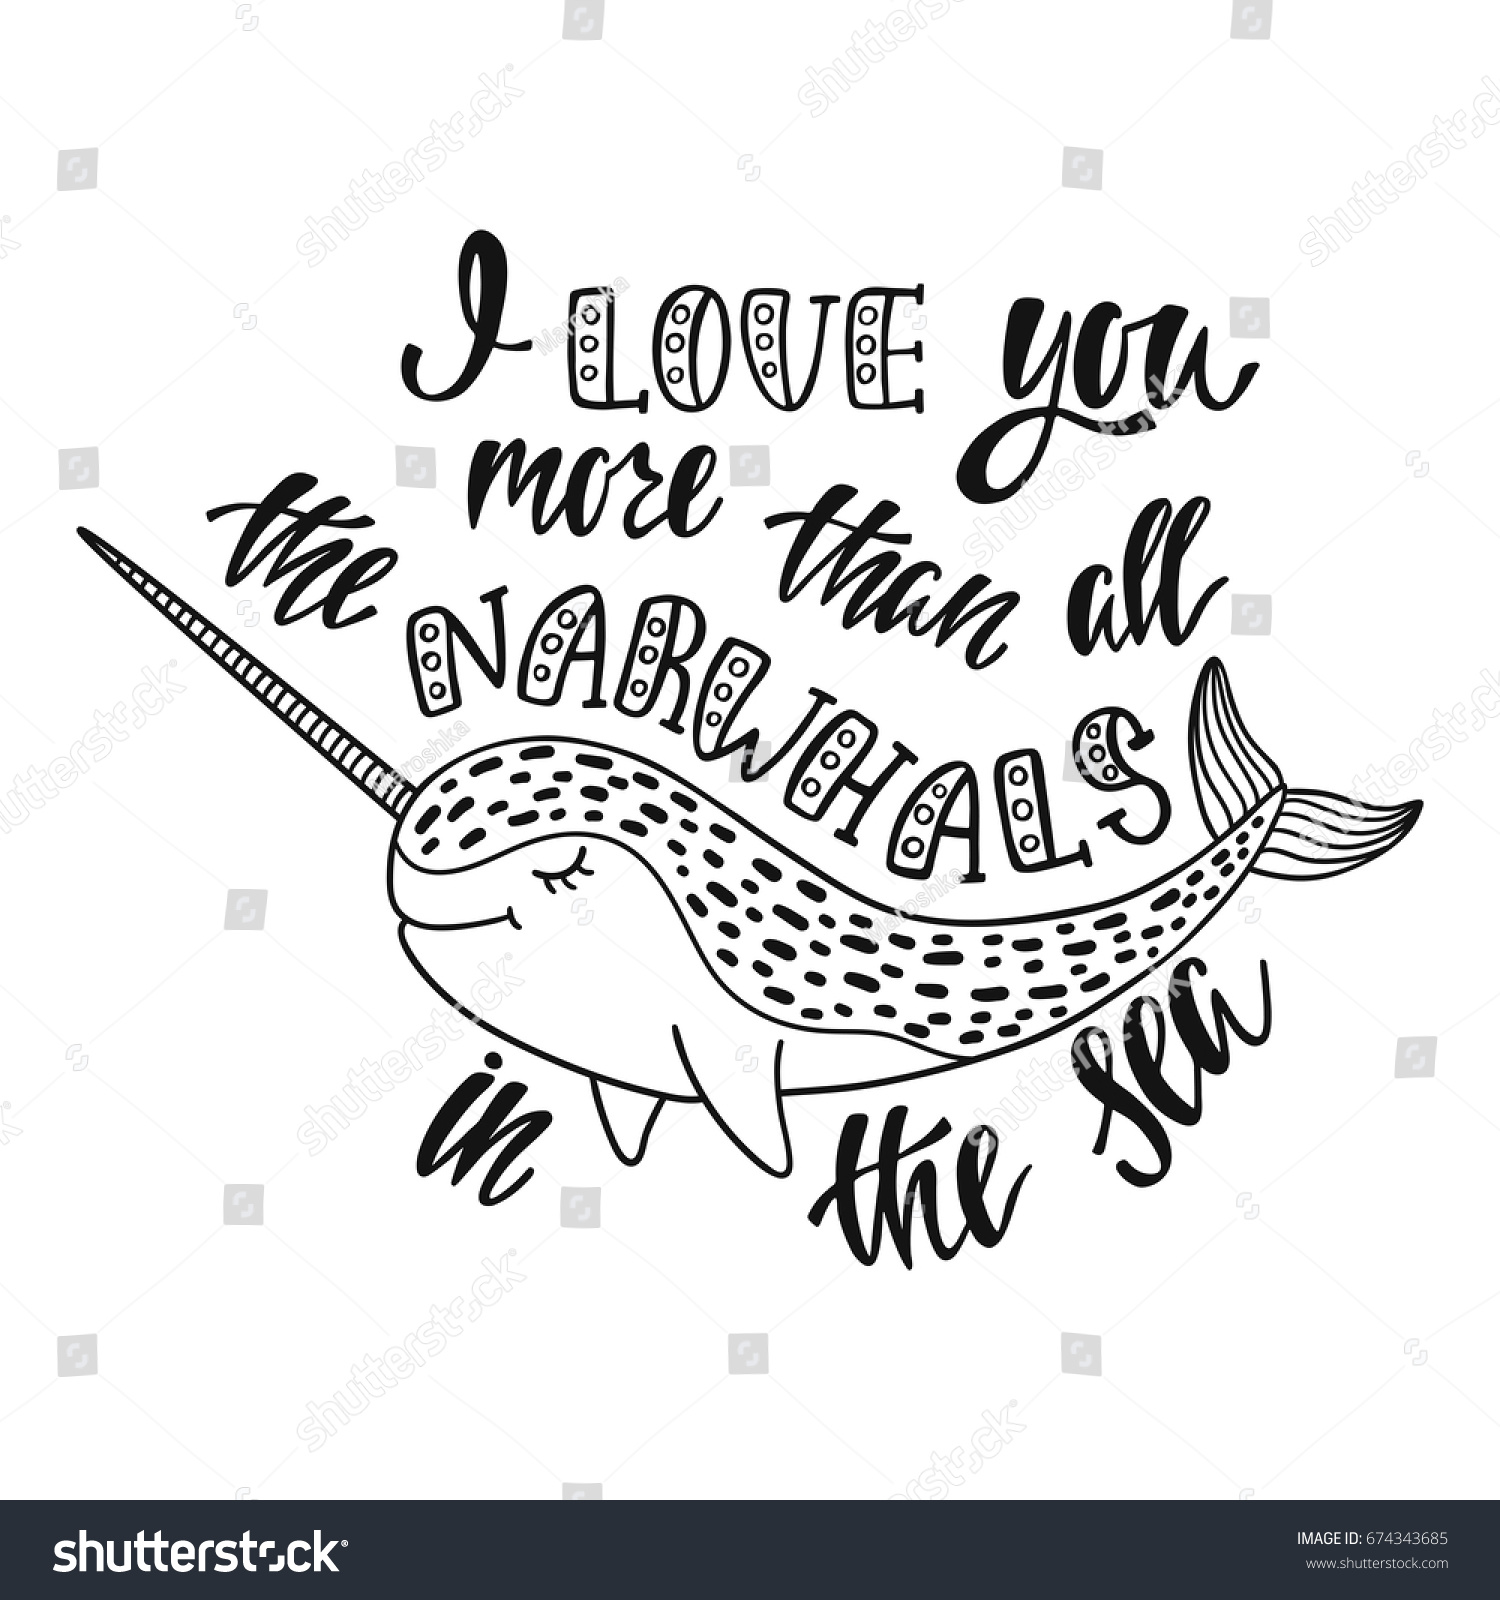 I love you more than all the narwhals in the sea Handwritten inspirational quote